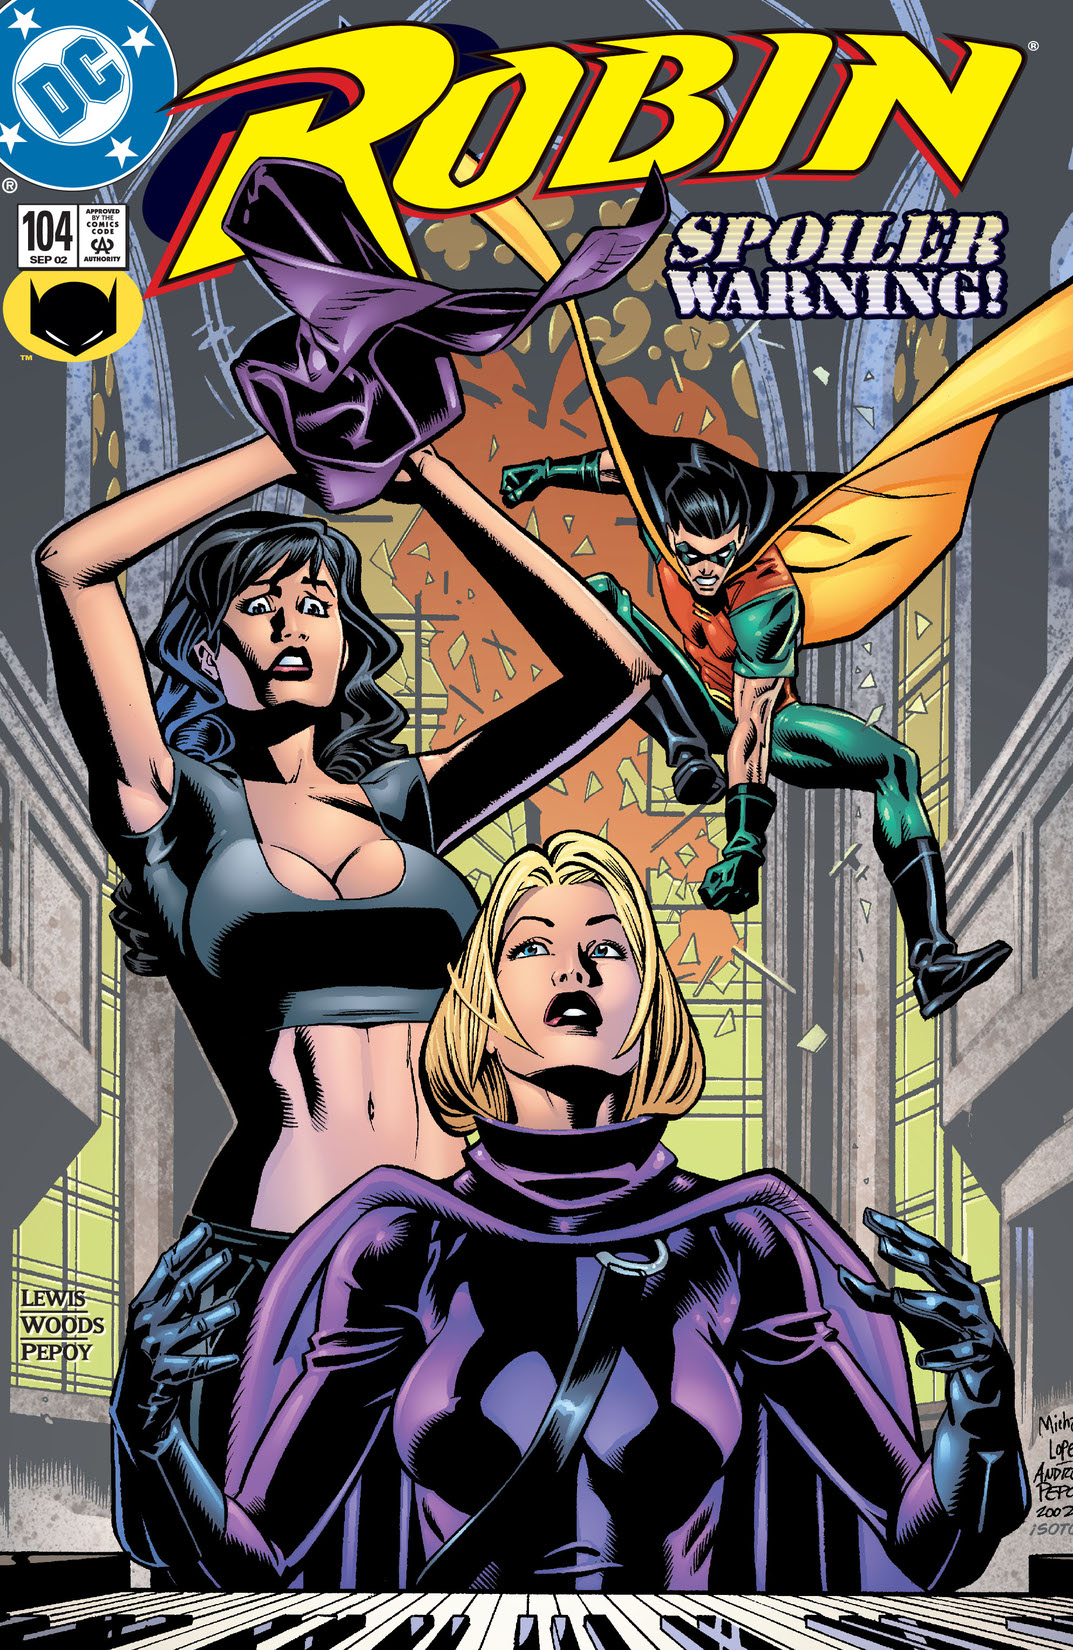 Robin (1993-) #104 preview images